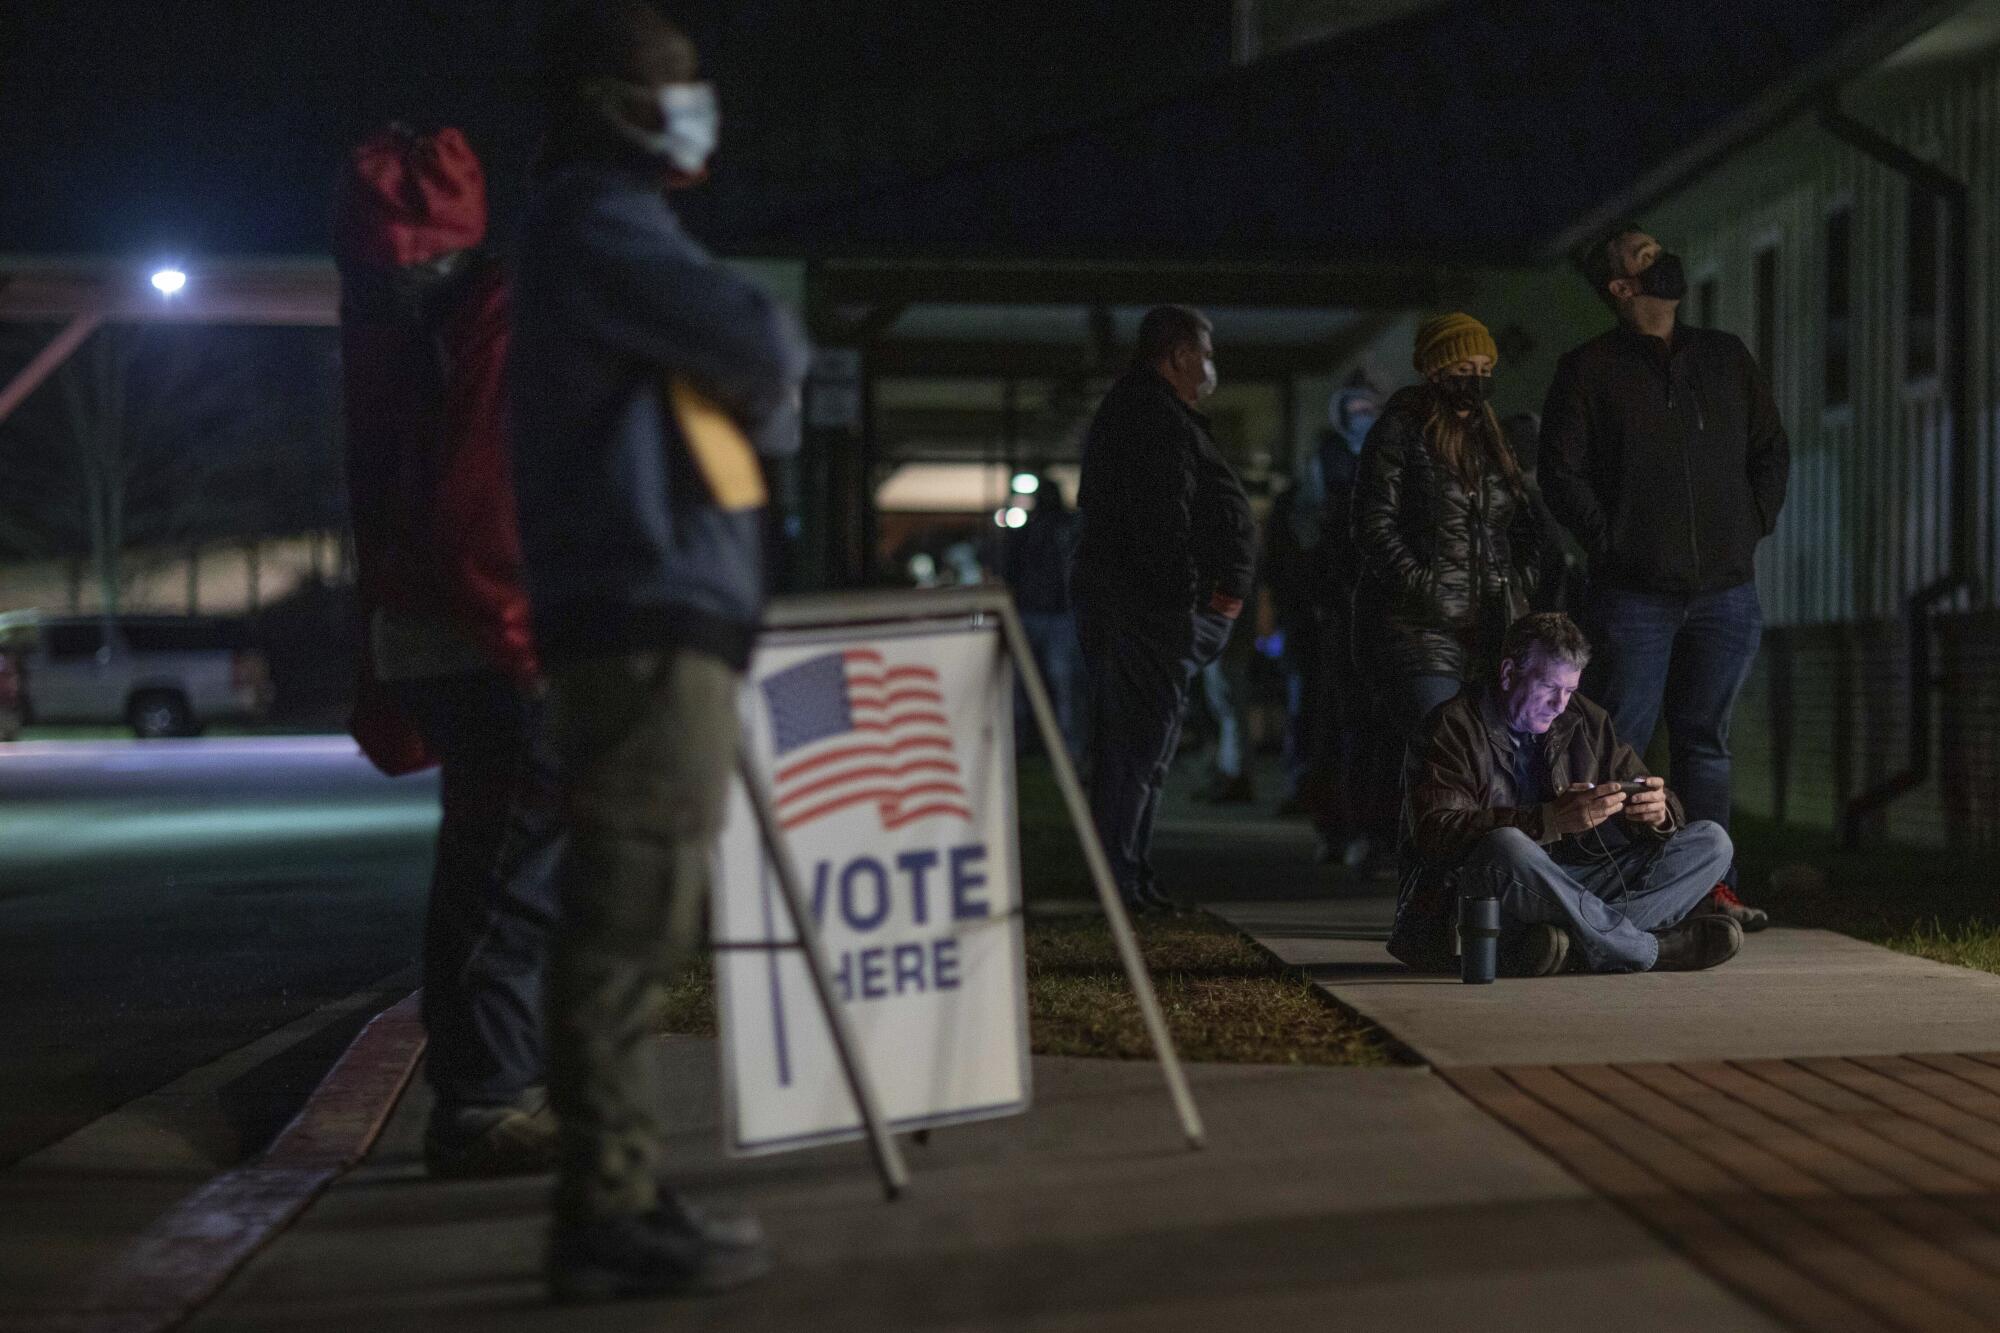 Voters wait in the dark by a "Vote here" sign, all in masks except one man sitting on the ground looking at his phone.